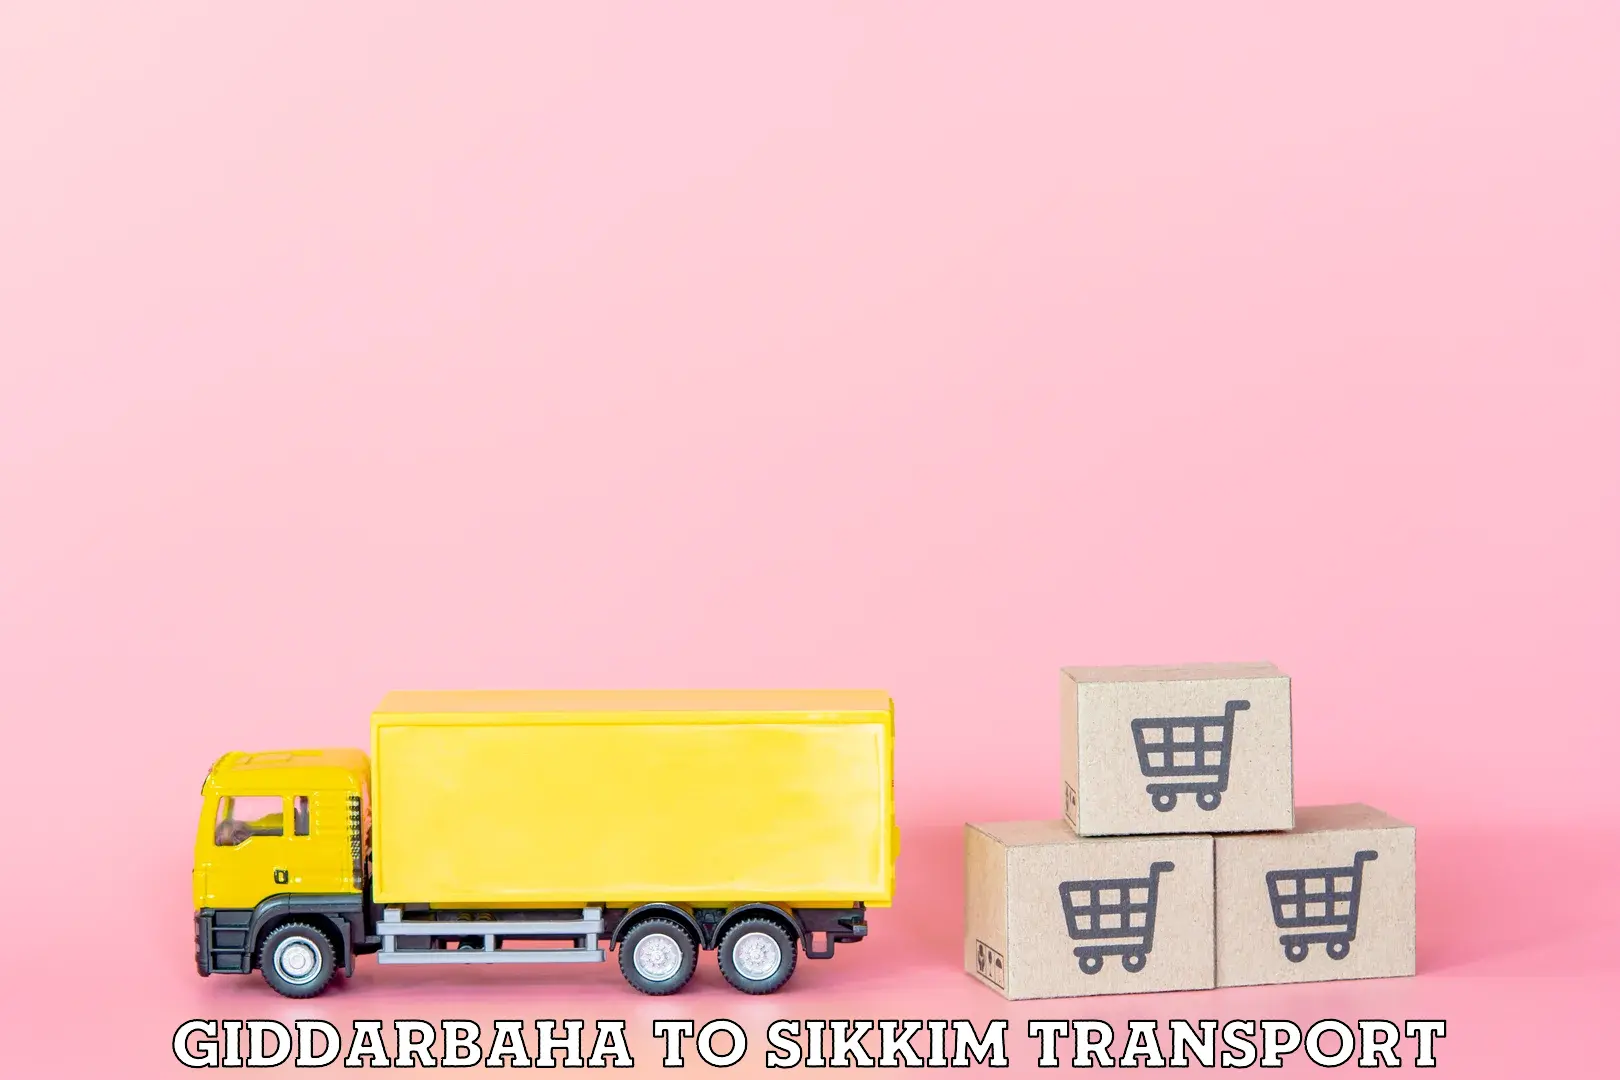 Truck transport companies in India Giddarbaha to West Sikkim